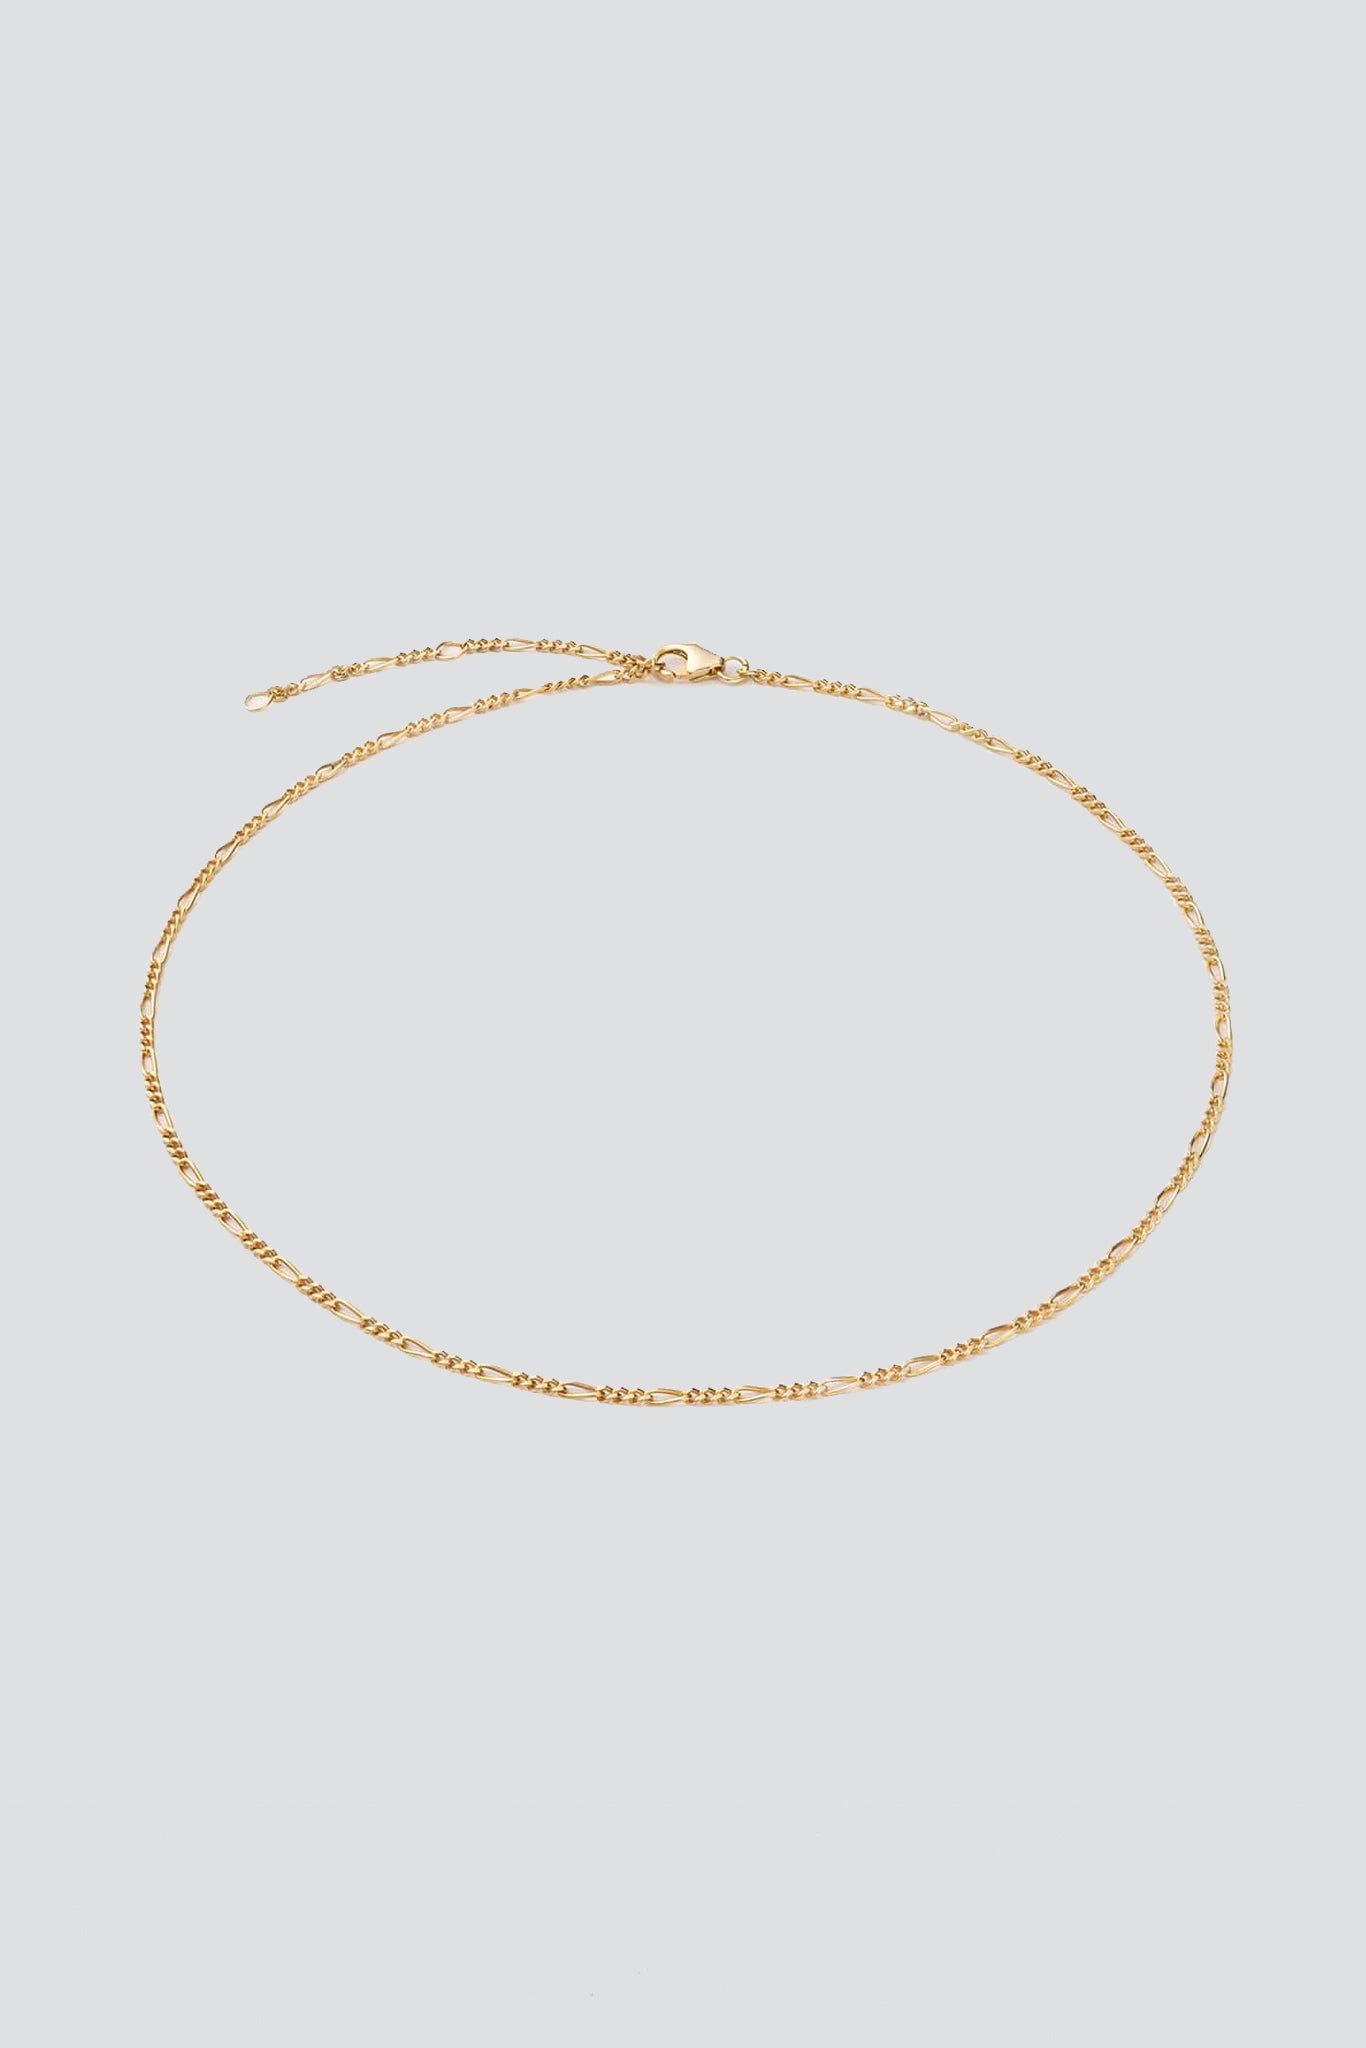 Gold Vermeil 3mm Figaro Chain Choker Necklace